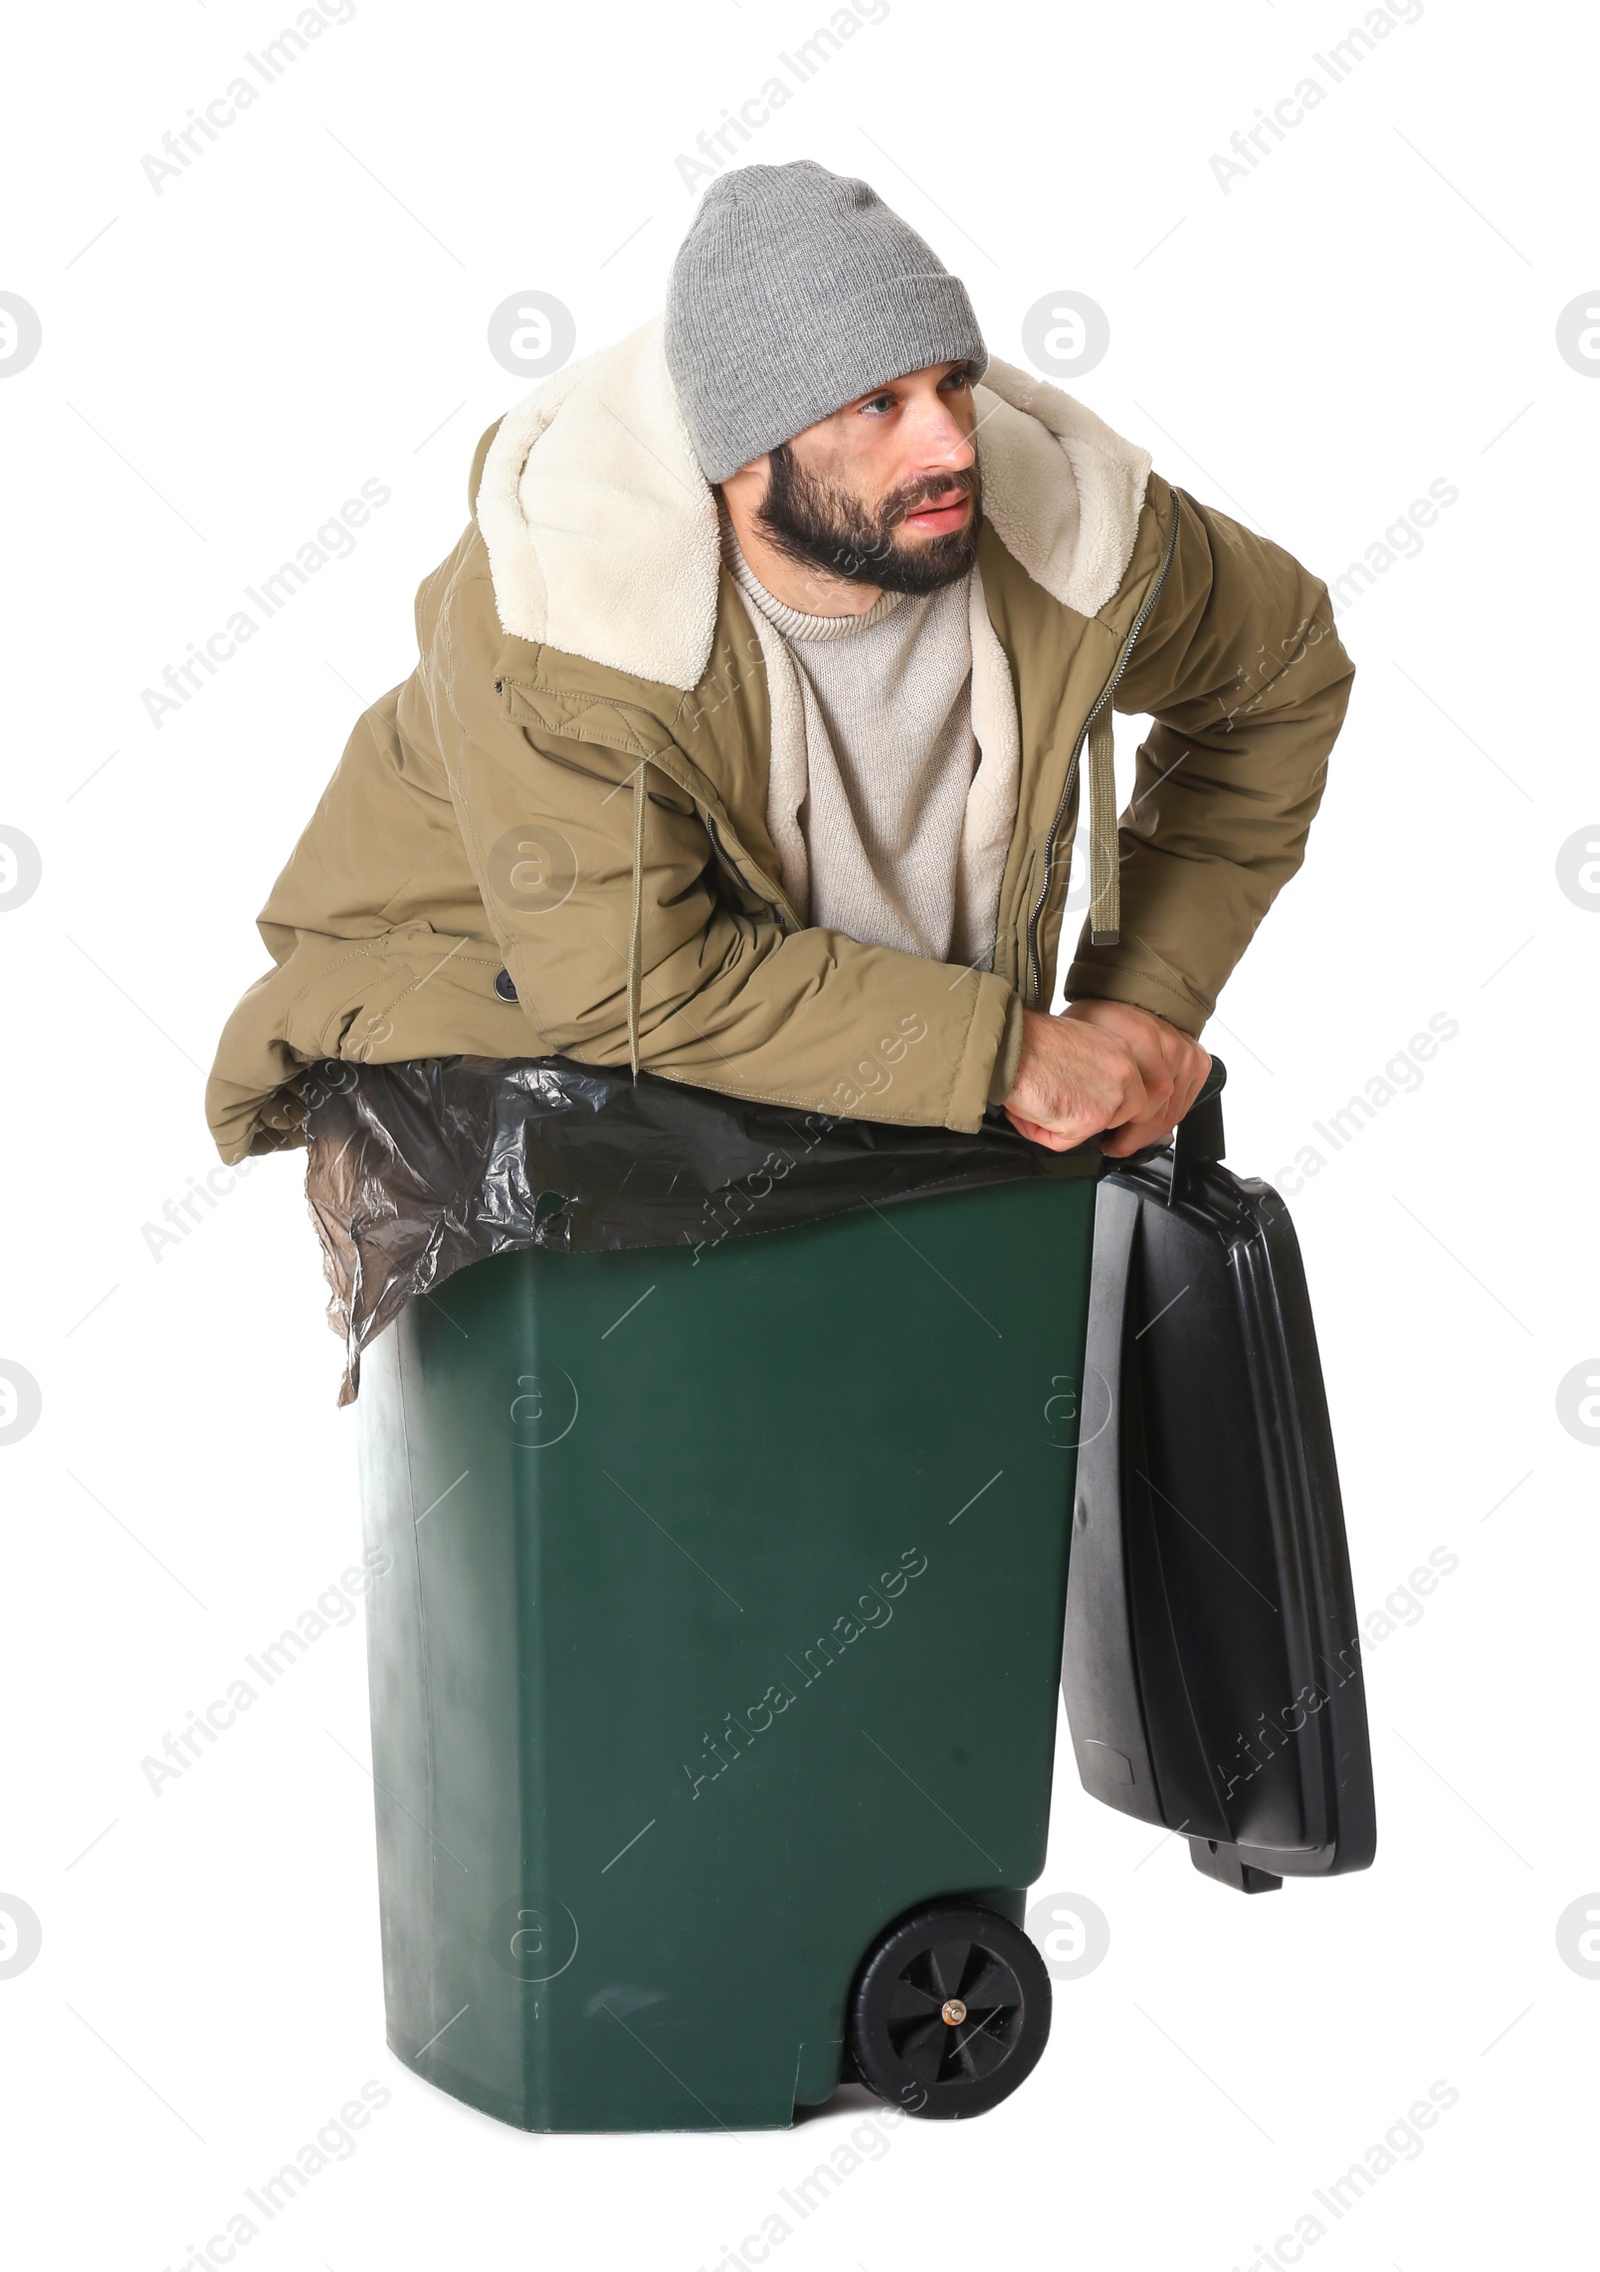 Photo of Poor homeless man in trash bin isolated on white